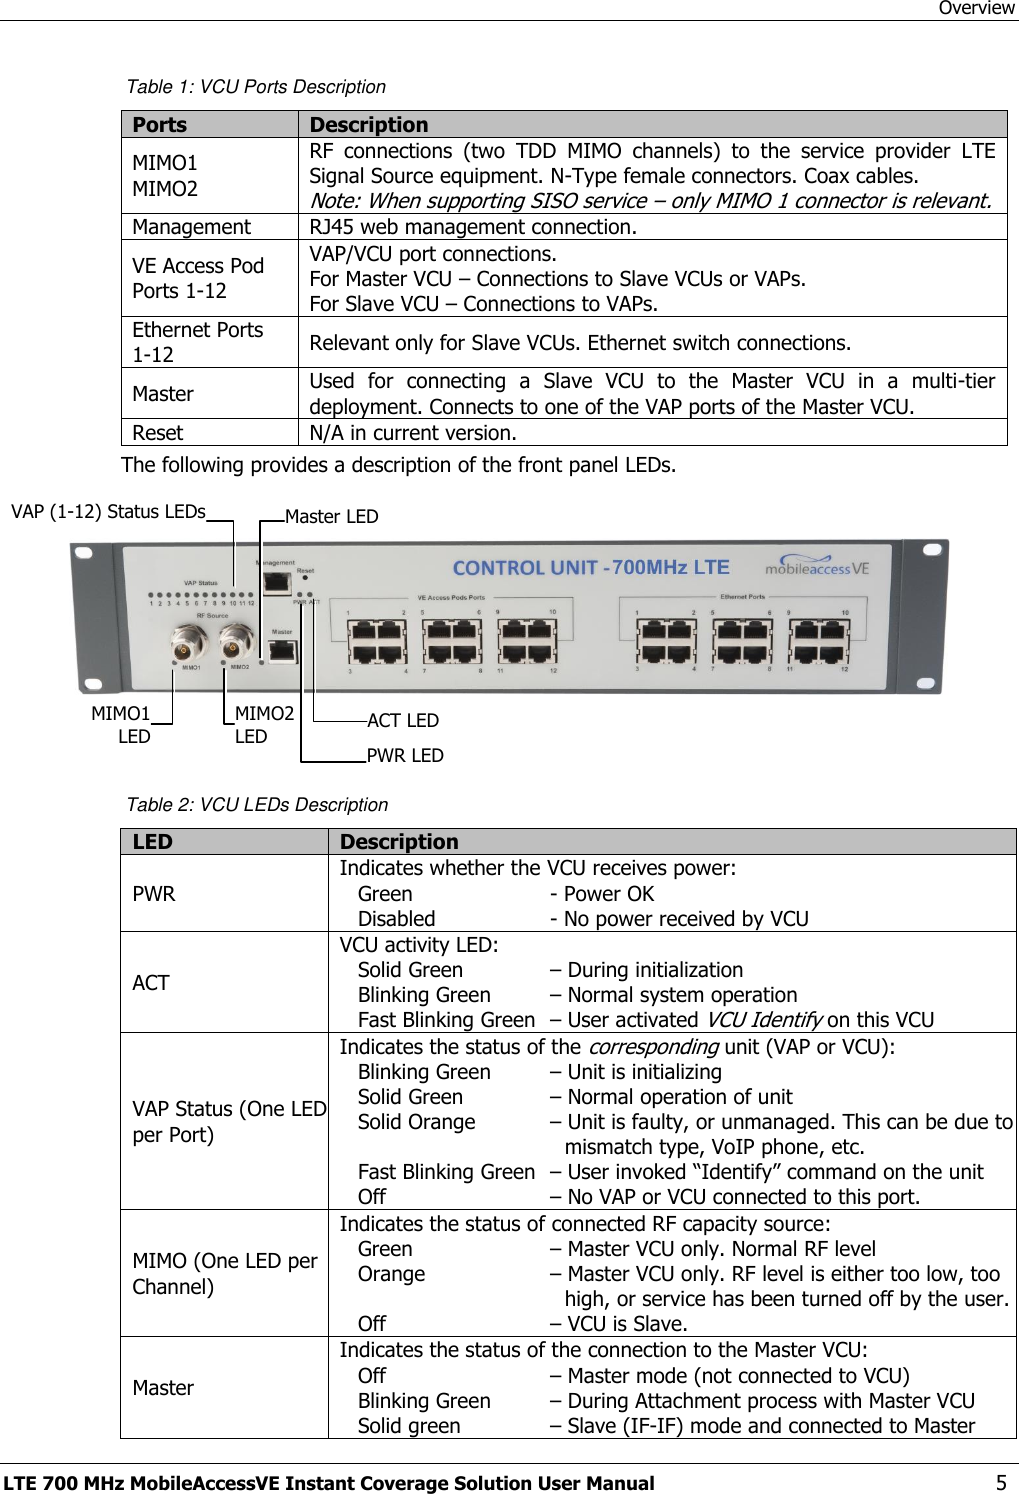 Overview LTE 700 MHz MobileAccessVE Instant Coverage Solution User Manual  5 Table 1: VCU Ports Description Ports Description MIMO1 MIMO2 RF  connections  (two  TDD  MIMO  channels)  to  the  service  provider  LTE Signal Source equipment. N-Type female connectors. Coax cables. Note: When supporting SISO service – only MIMO 1 connector is relevant. Management RJ45 web management connection. VE Access Pod Ports 1-12  VAP/VCU port connections.  For Master VCU – Connections to Slave VCUs or VAPs. For Slave VCU – Connections to VAPs. Ethernet Ports 1-12  Relevant only for Slave VCUs. Ethernet switch connections.  Master Used  for  connecting  a  Slave  VCU  to  the  Master  VCU  in  a  multi-tier deployment. Connects to one of the VAP ports of the Master VCU. Reset  N/A in current version. The following provides a description of the front panel LEDs.     Table 2: VCU LEDs Description LED Description PWR Indicates whether the VCU receives power: Green   - Power OK  Disabled   - No power received by VCU ACT VCU activity LED: Solid Green   – During initialization  Blinking Green   – Normal system operation Fast Blinking Green  – User activated VCU Identify on this VCU VAP Status (One LED per Port) Indicates the status of the corresponding unit (VAP or VCU): Blinking Green   – Unit is initializing Solid Green   – Normal operation of unit Solid Orange   – Unit is faulty, or unmanaged. This can be due to mismatch type, VoIP phone, etc. Fast Blinking Green  – User invoked “Identify” command on the unit Off   – No VAP or VCU connected to this port. MIMO (One LED per Channel) Indicates the status of connected RF capacity source:  Green  – Master VCU only. Normal RF level  Orange     – Master VCU only. RF level is either too low, too high, or service has been turned off by the user.  Off   – VCU is Slave. Master Indicates the status of the connection to the Master VCU:  Off   – Master mode (not connected to VCU) Blinking Green   – During Attachment process with Master VCU Solid green   – Slave (IF-IF) mode and connected to Master PWR LED   ACT LED   VAP (1-12) Status LEDs    Master LED   MIMO1 LED   MIMO2 LED   